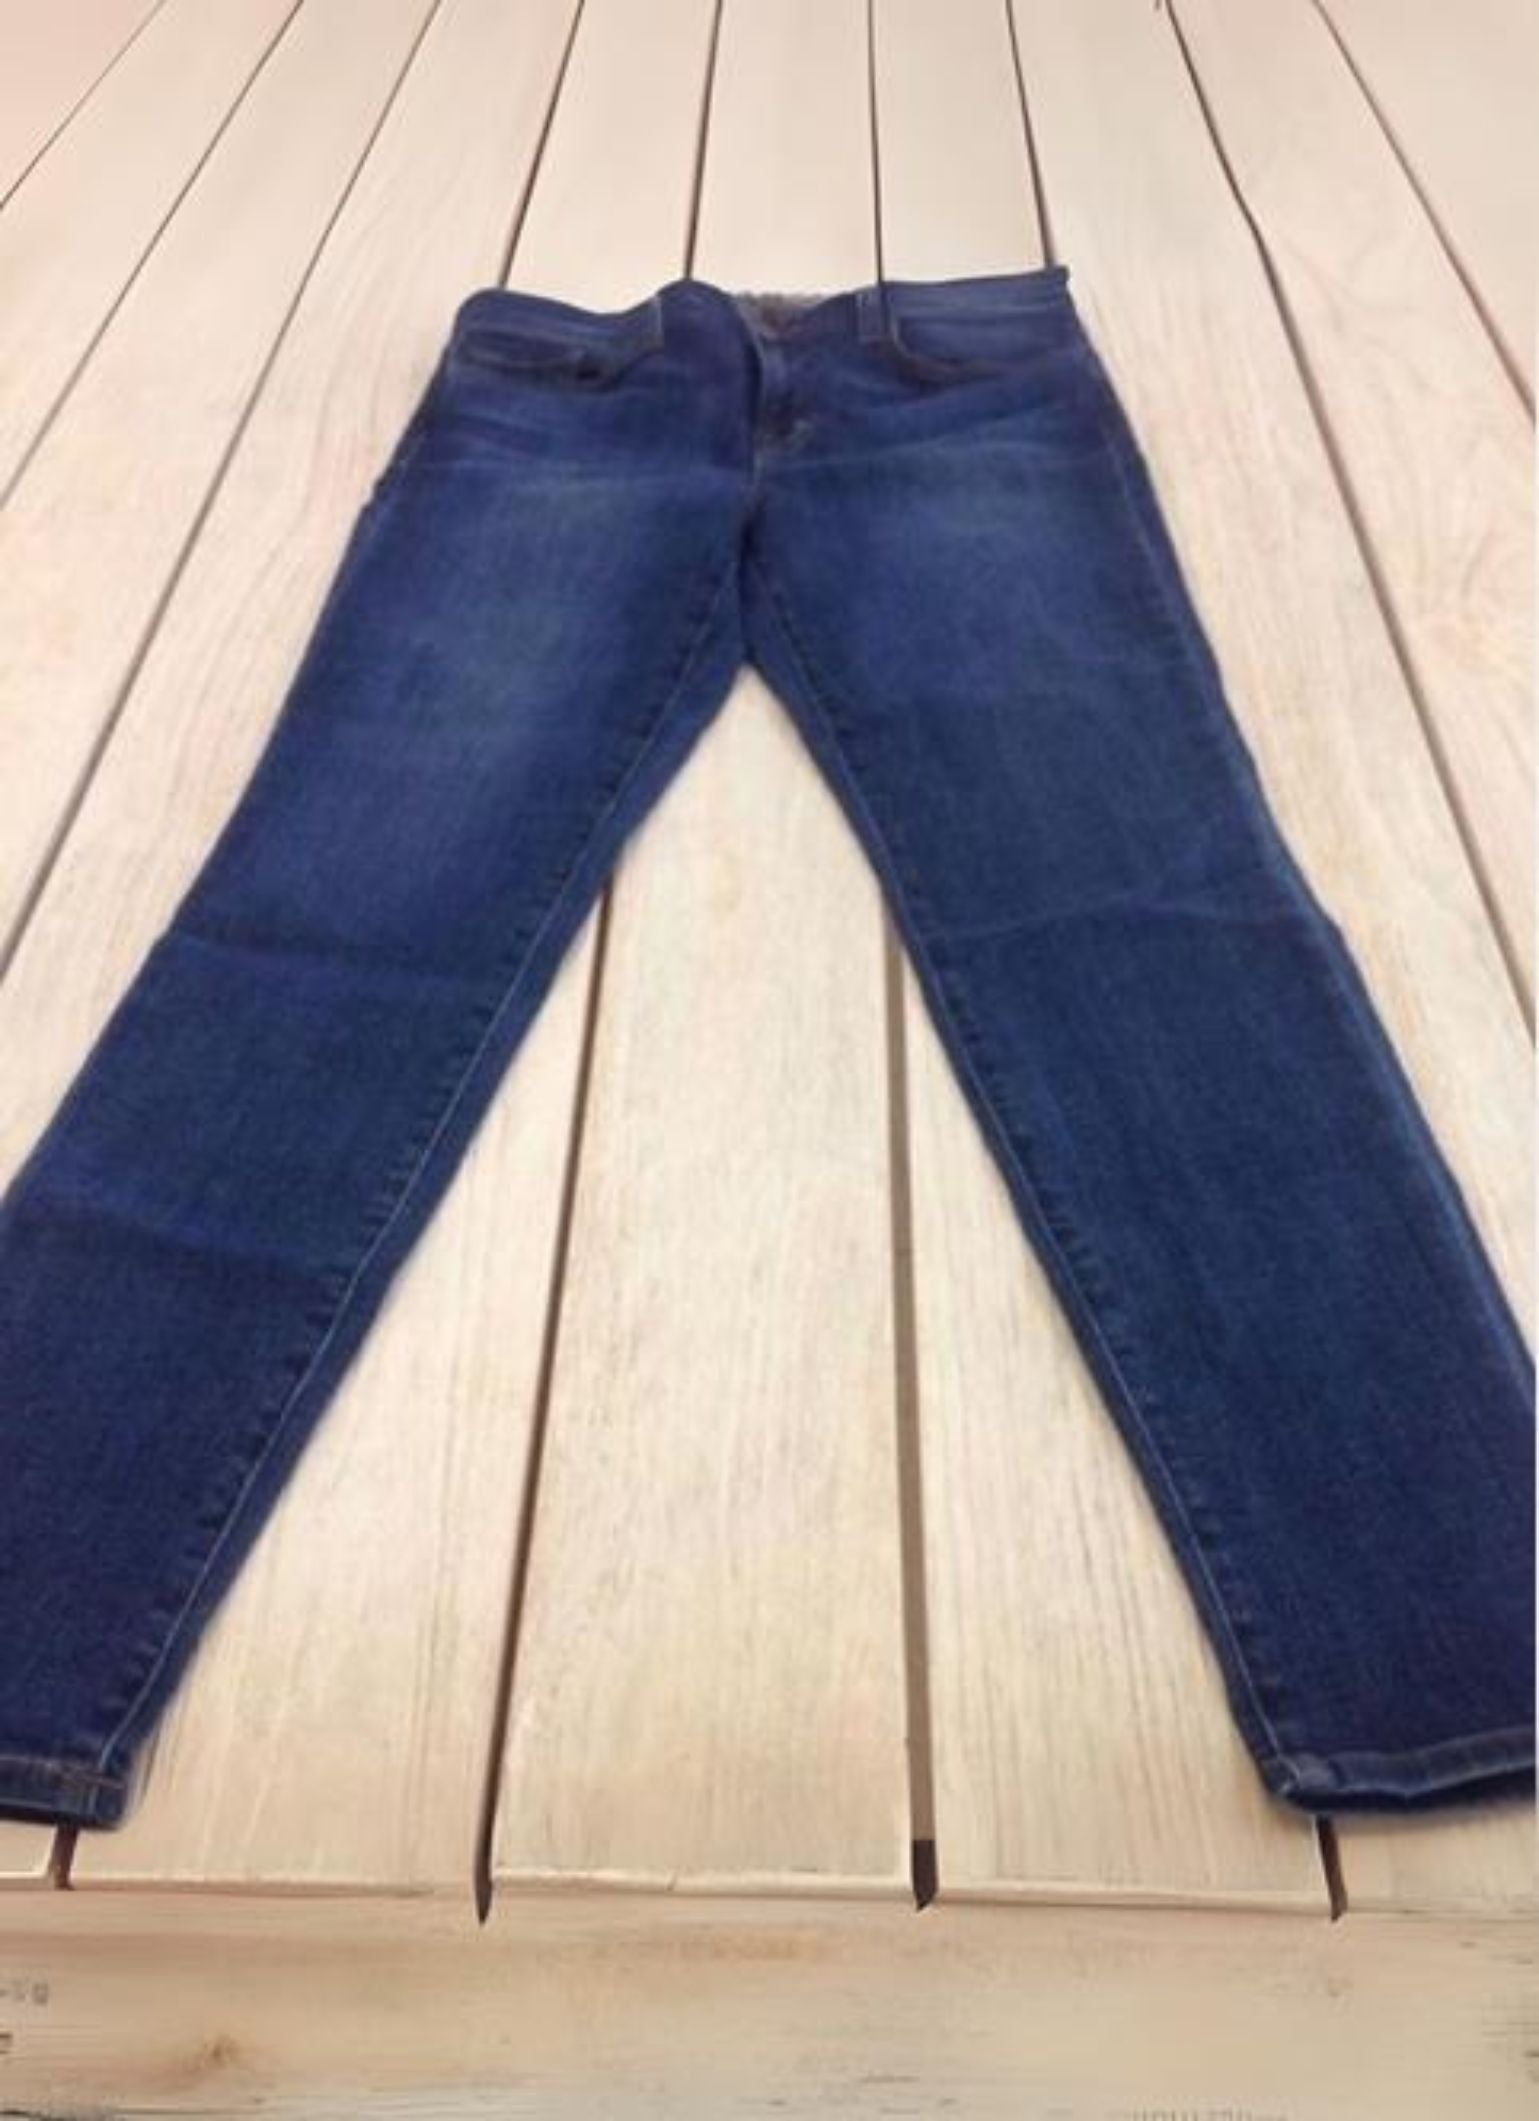 J Brand Jeans - Second Chance